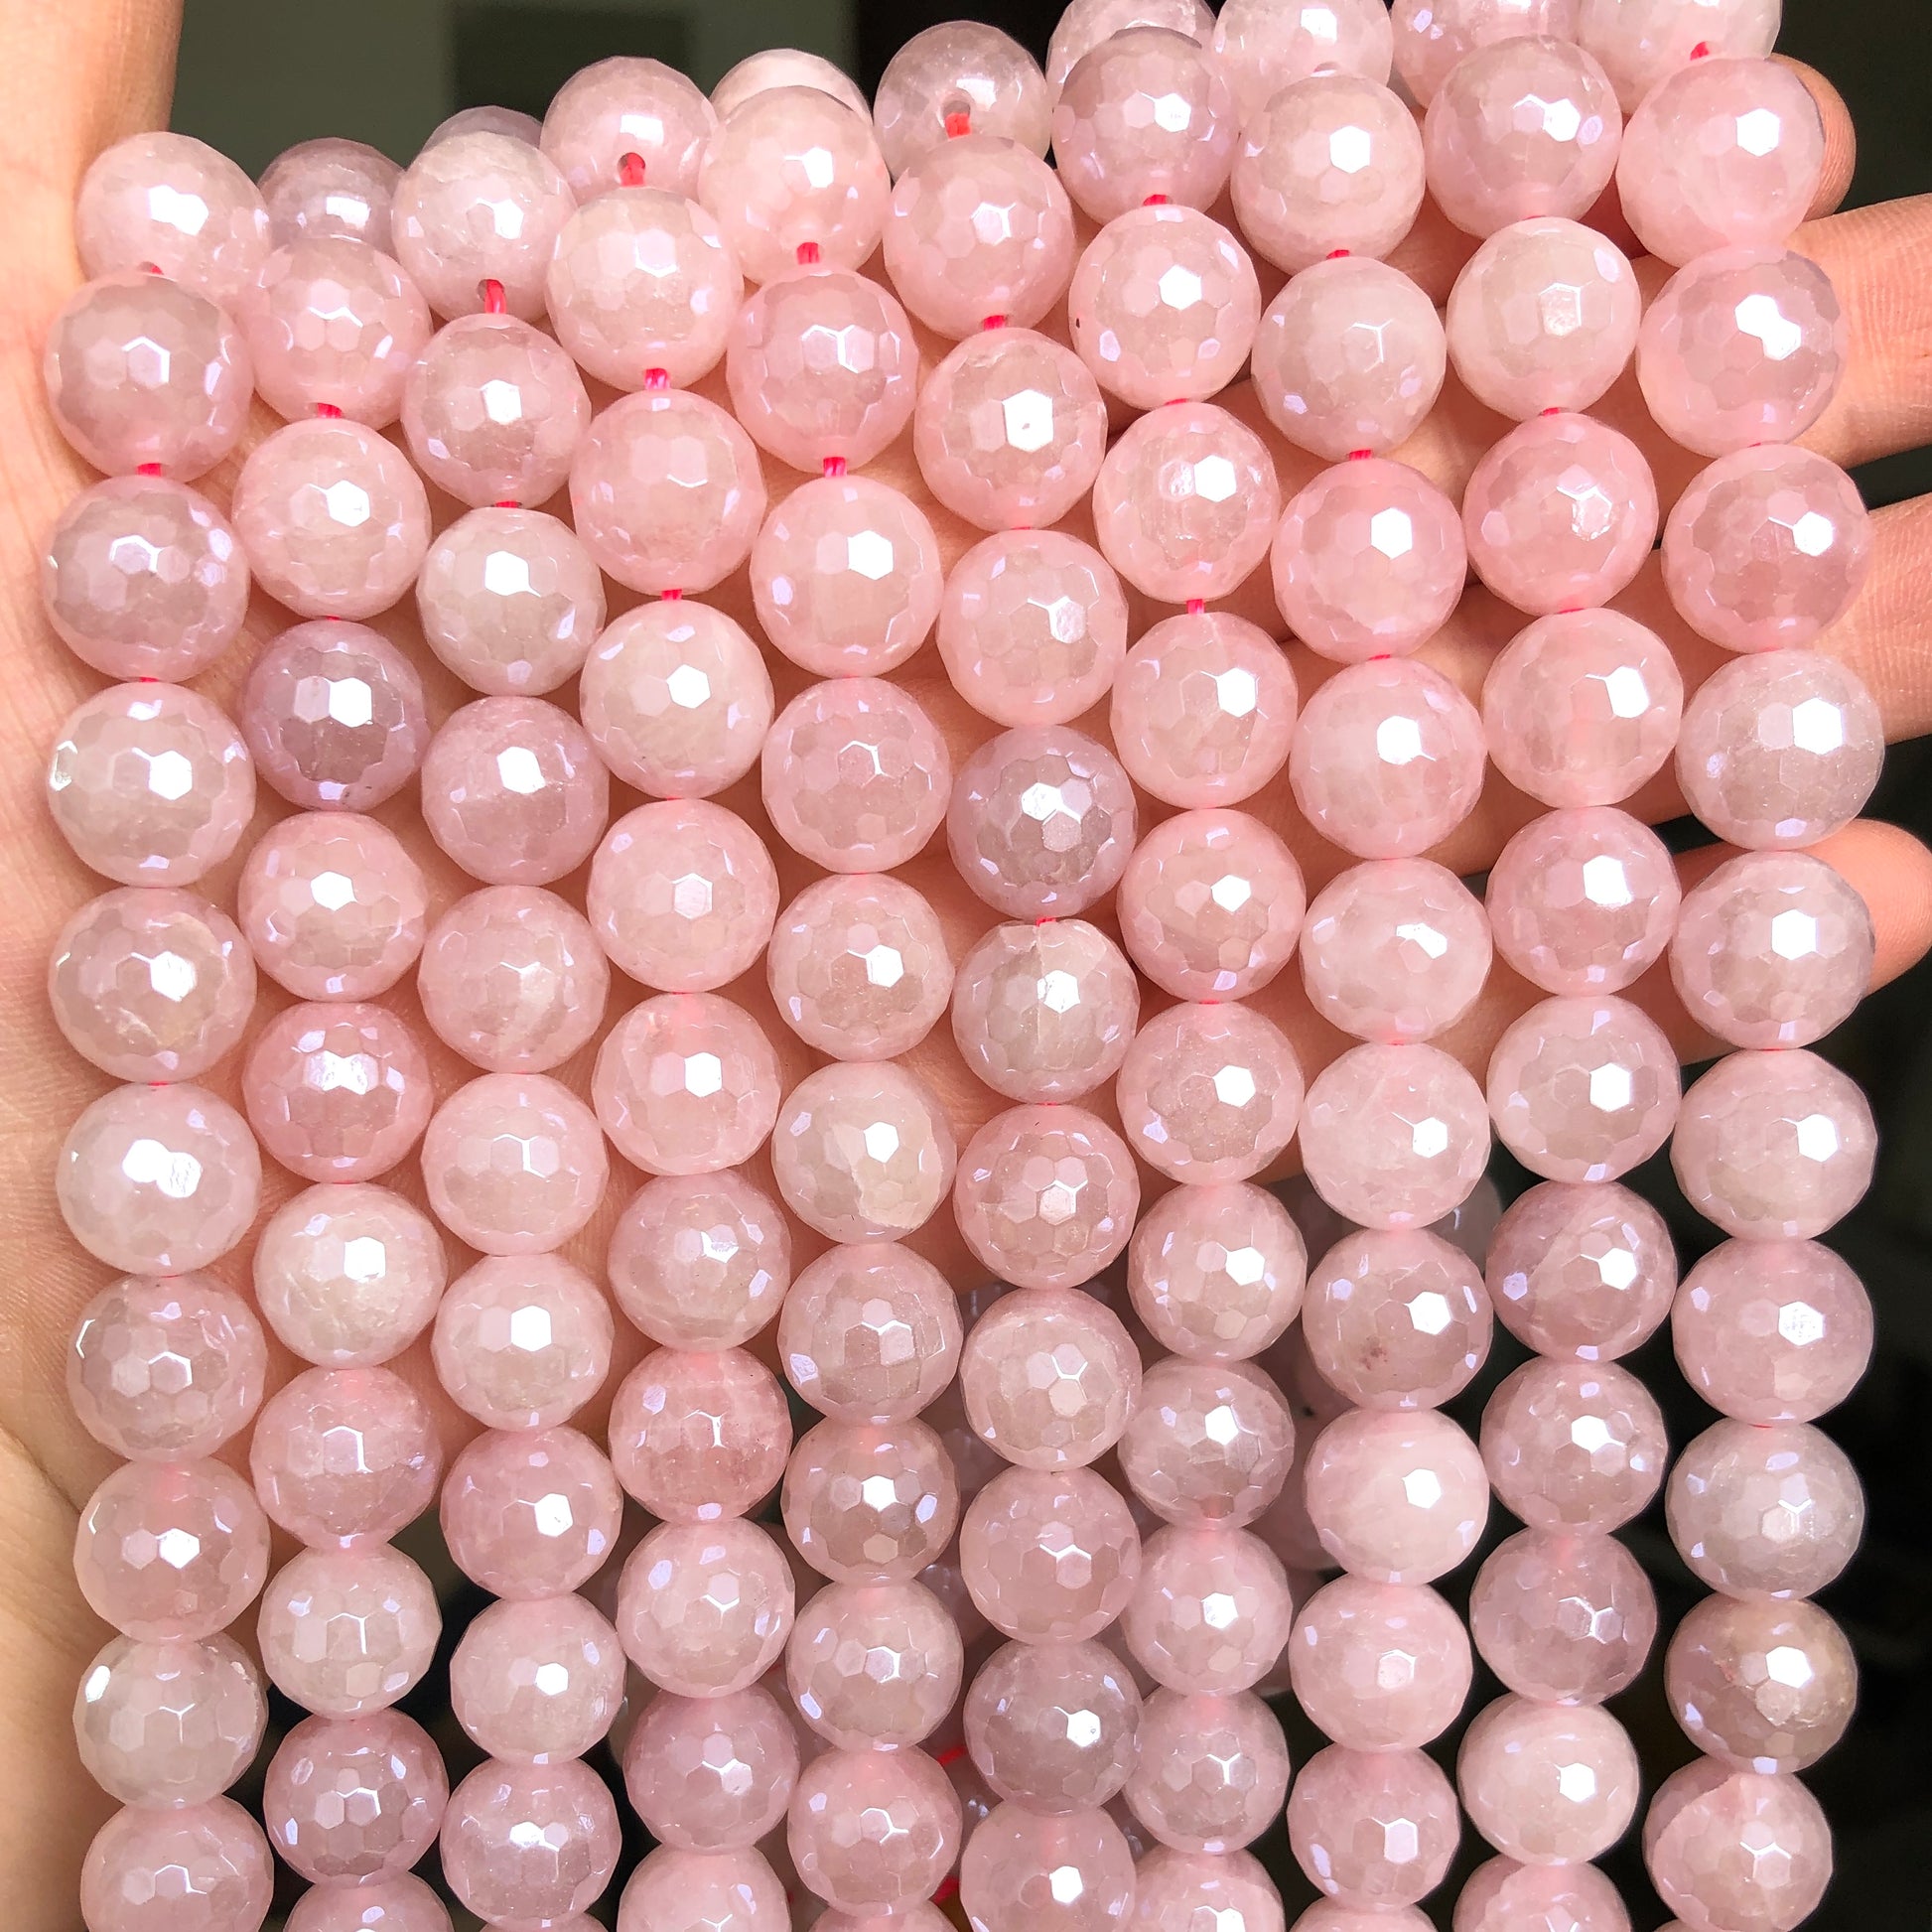 10, 12mm Electroplated Rose Quartz Stone Faceted Beads-Grade A Premium Quality Electroplated Beads 12mm Stone Beads New Beads Arrivals Premium Quality Agate Beads Charms Beads Beyond